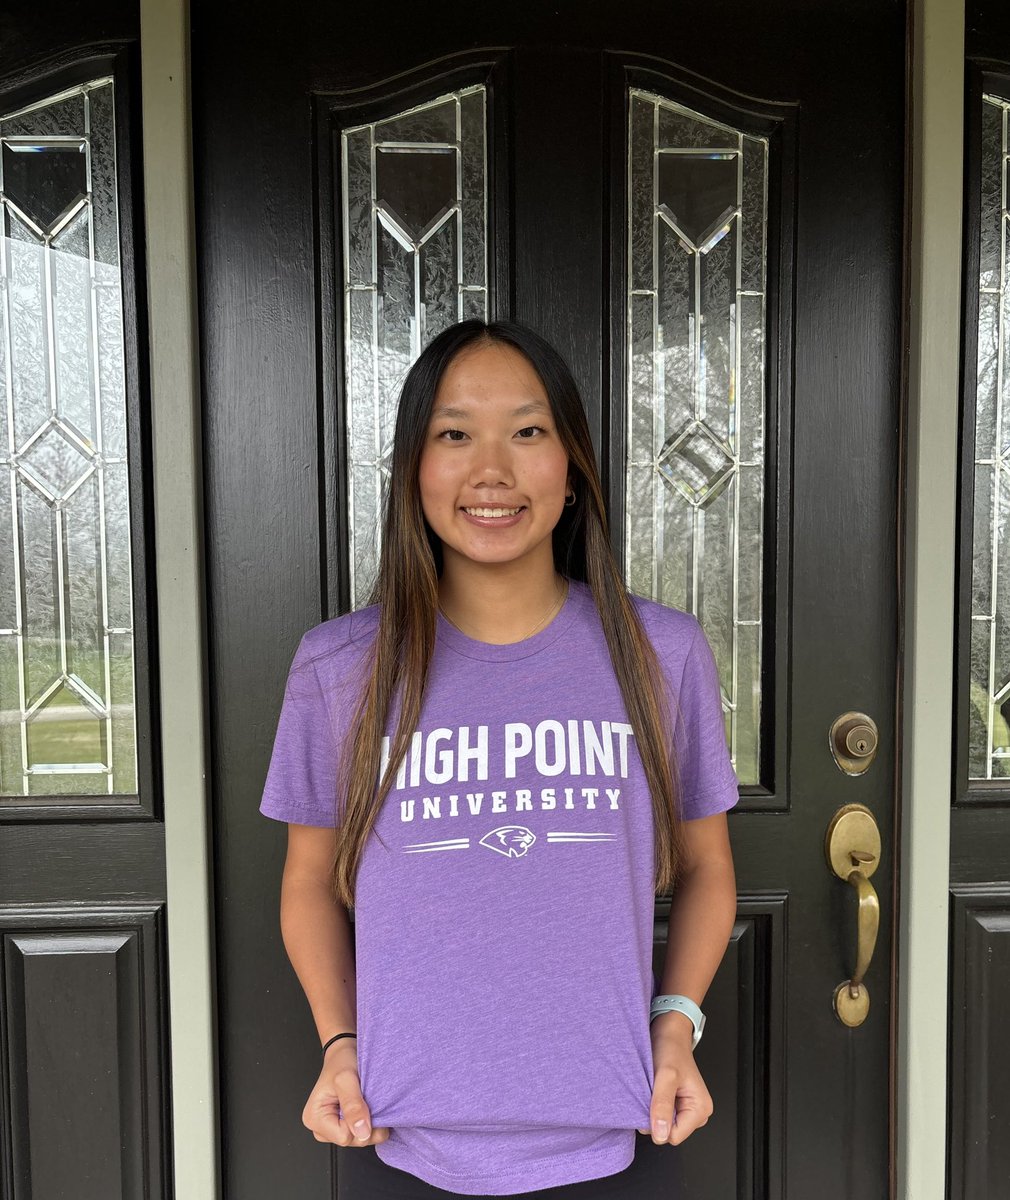 I’m so excited to announce my verbal commitment to continue my athletic and academic career at High Point University!! I am beyond thankful for my family, coaches, and teammates who have supported me and helped me get here💜💜#gopanthers 

@hpu_wsoc @ohioelite @LebanonHSSoccer